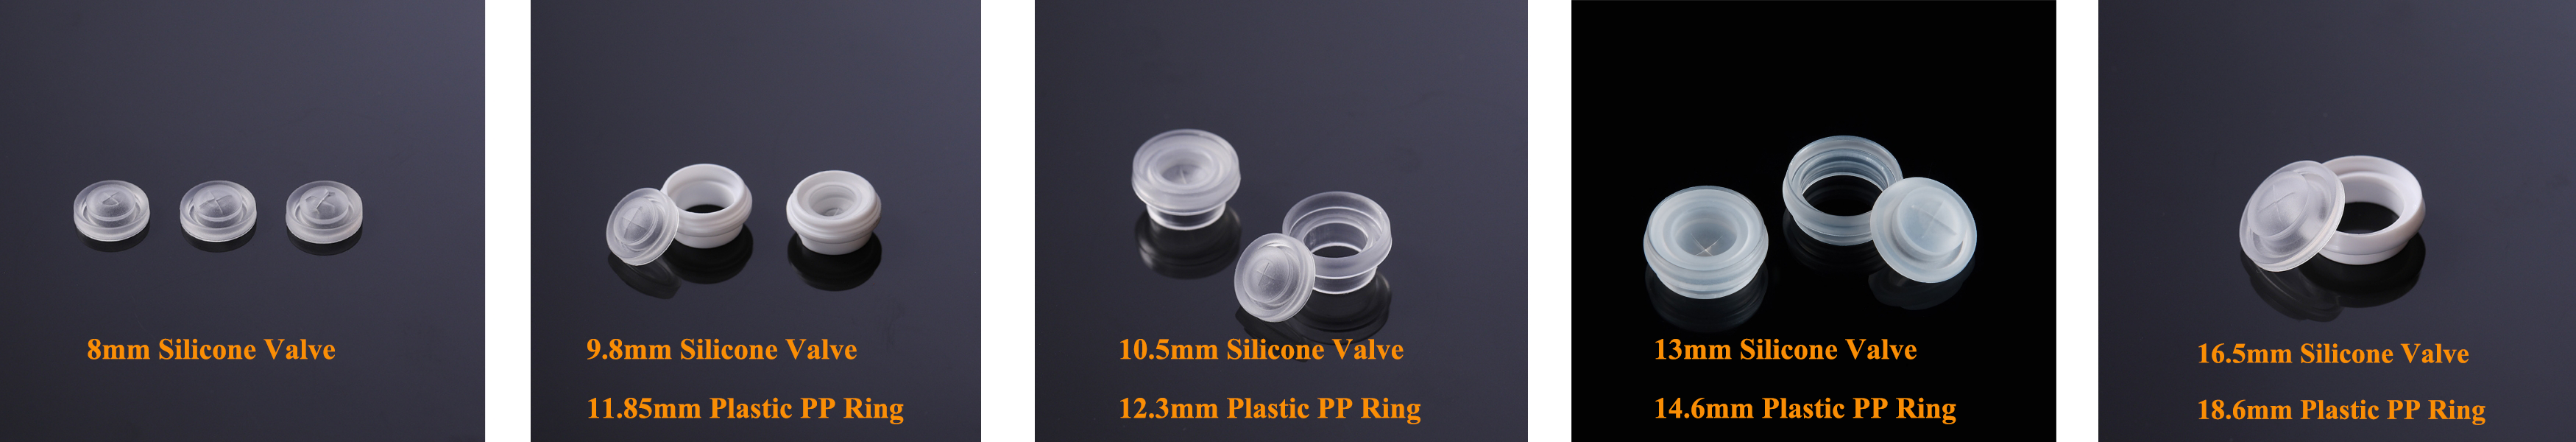 Hopewell's 8 Different Types of Silicone Valves In Public Mold